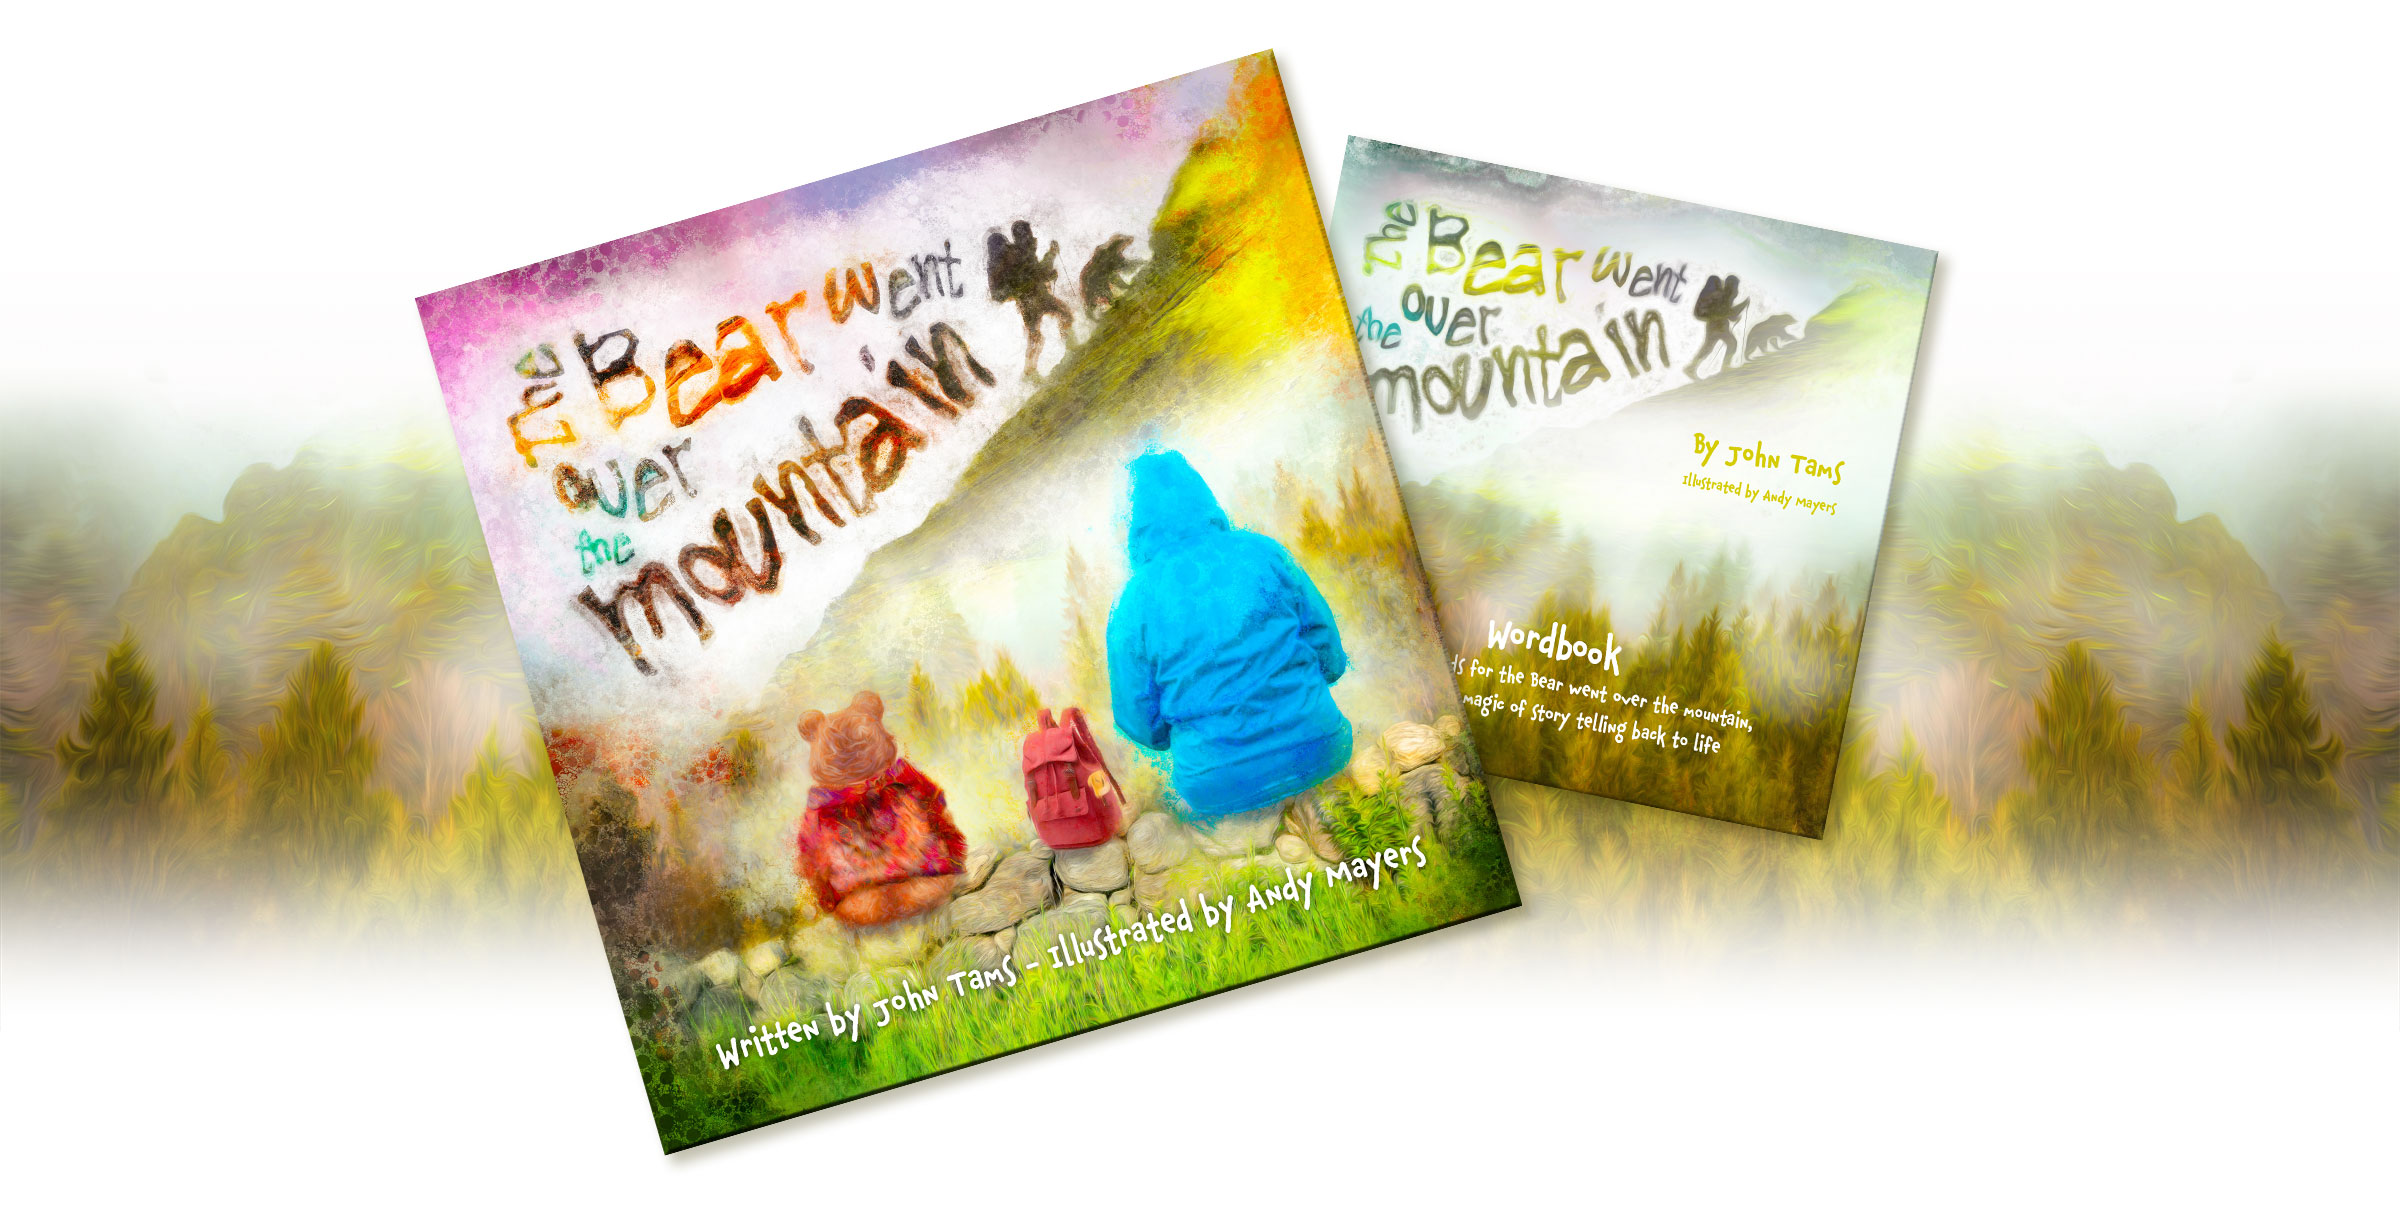 The Bear Went over the Mountain, a freestyle story telling book